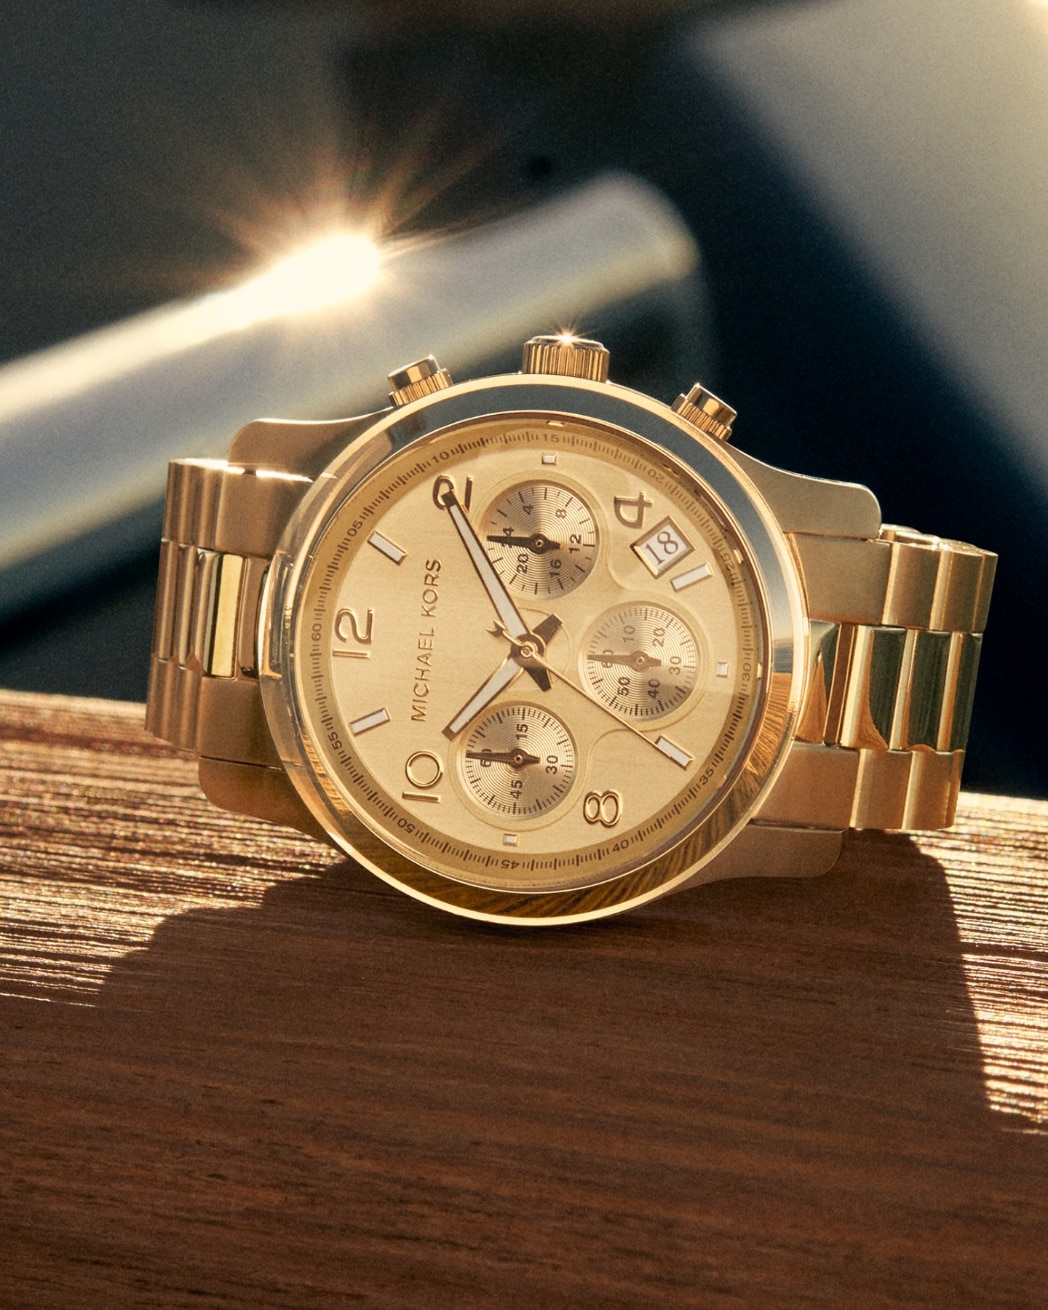 One-Of-A-Kind, Just Like Michael Kors Monogramming And Engraving